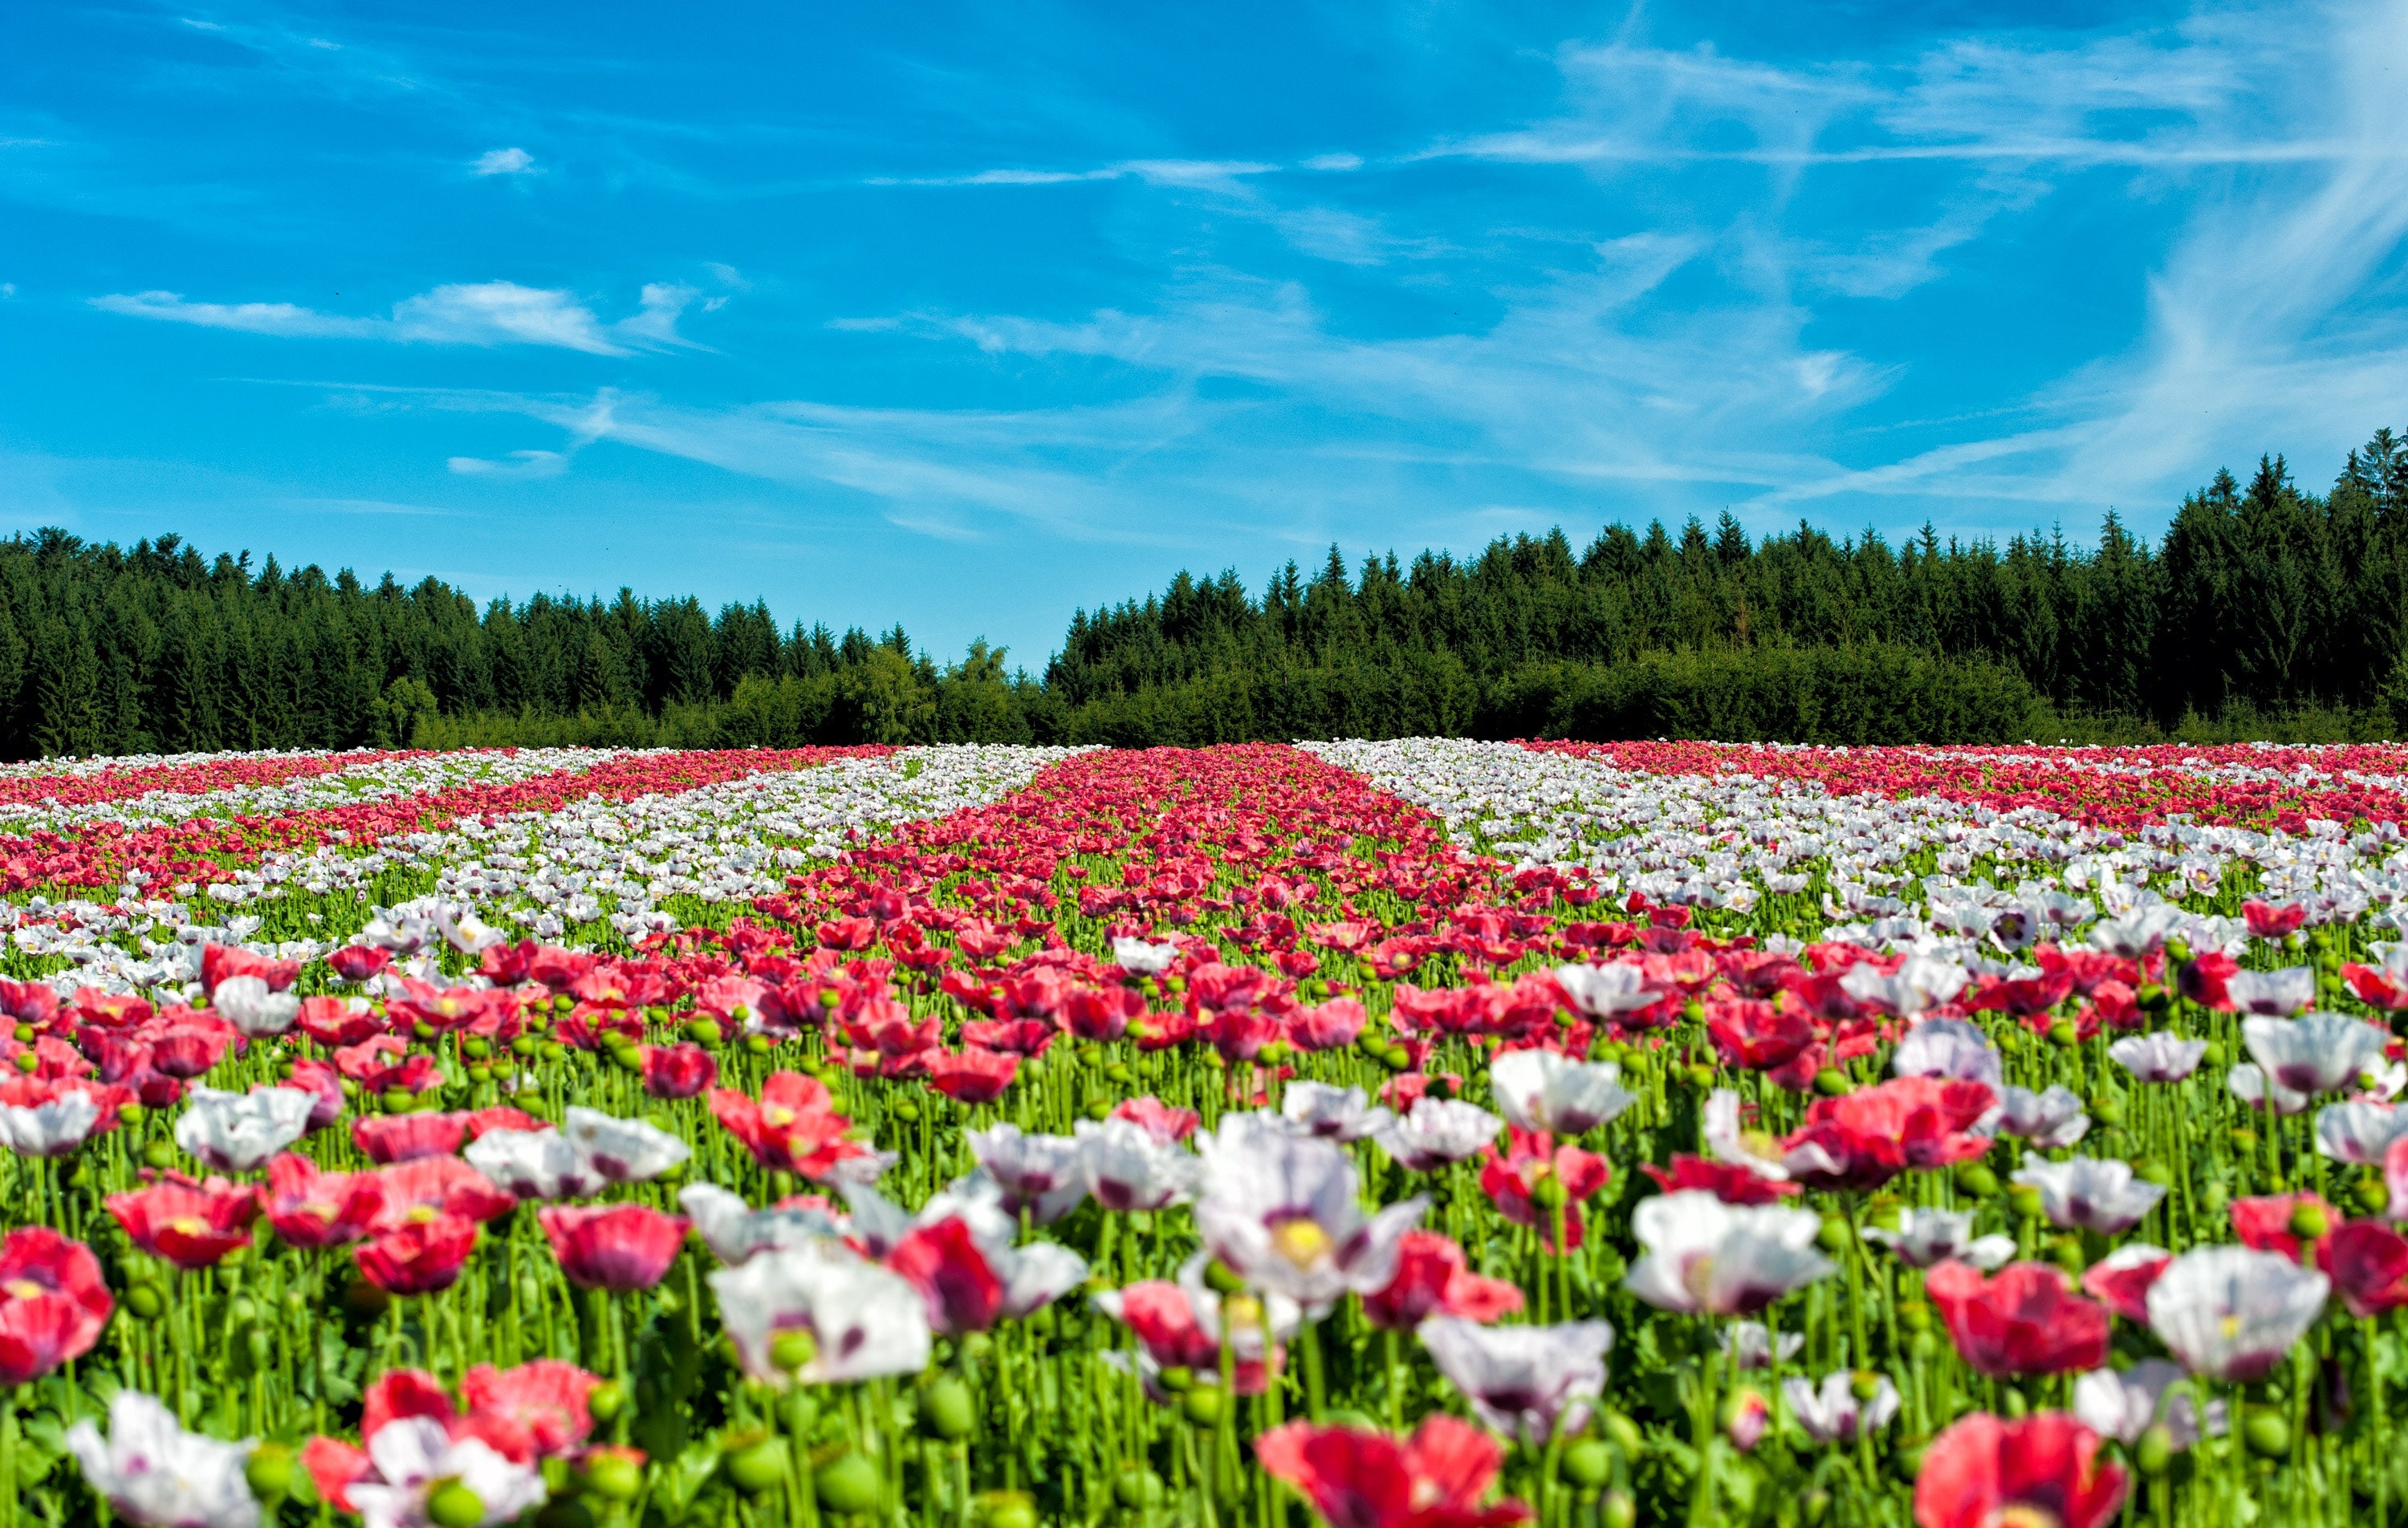 Red and White Flowers Under Blue Sky during Daytime, Bloom, Blossom, Flora, Flowers, HQ Photo